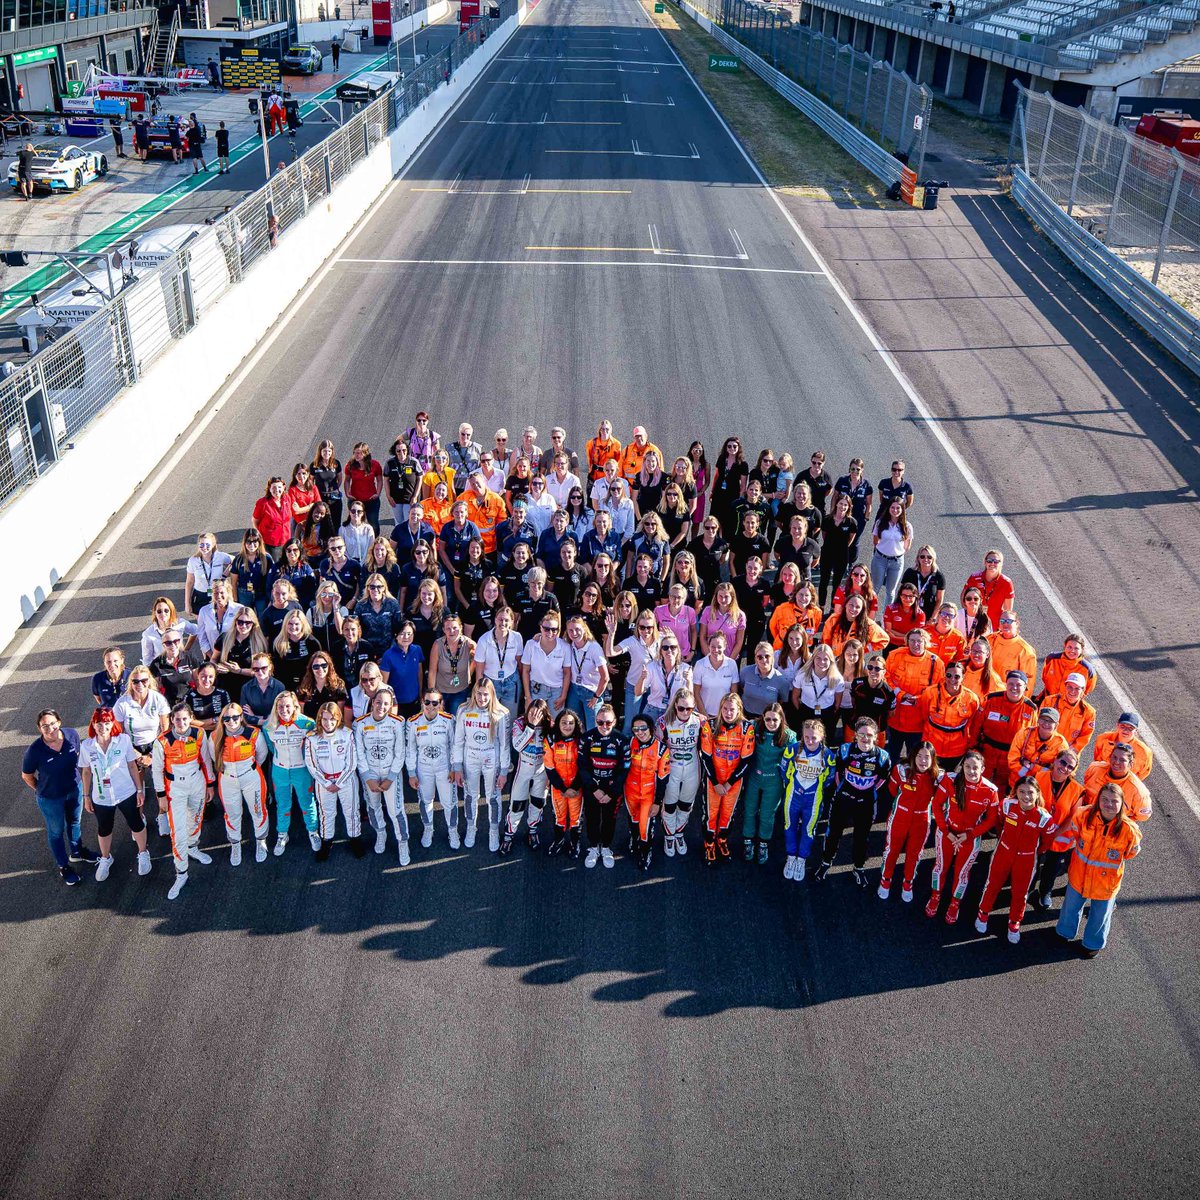 Uniting Women in Motorsport. 💪

Women played an integral role across the Zandvoort race weekend. 

From drivers to carrying out essential roles at the circuit, they all came together to drive forward the future of women in motorsport.